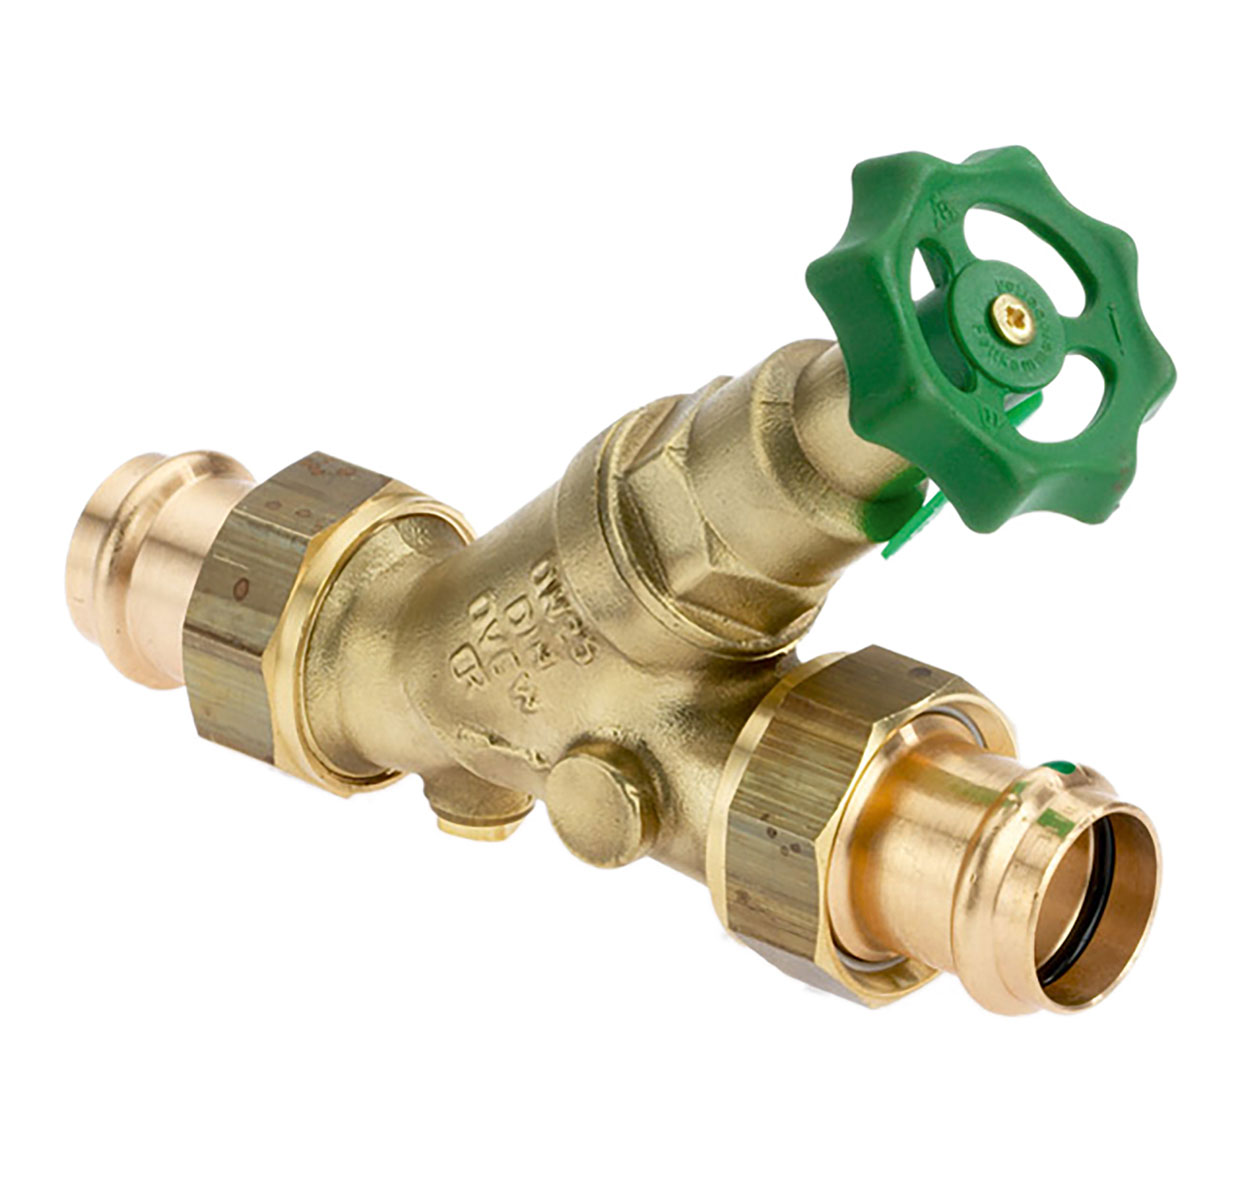 1630150 - CR-Brass Combined Free-flow and Backflow-preventer Valve Viega Profipress, not-rising, without drain valve